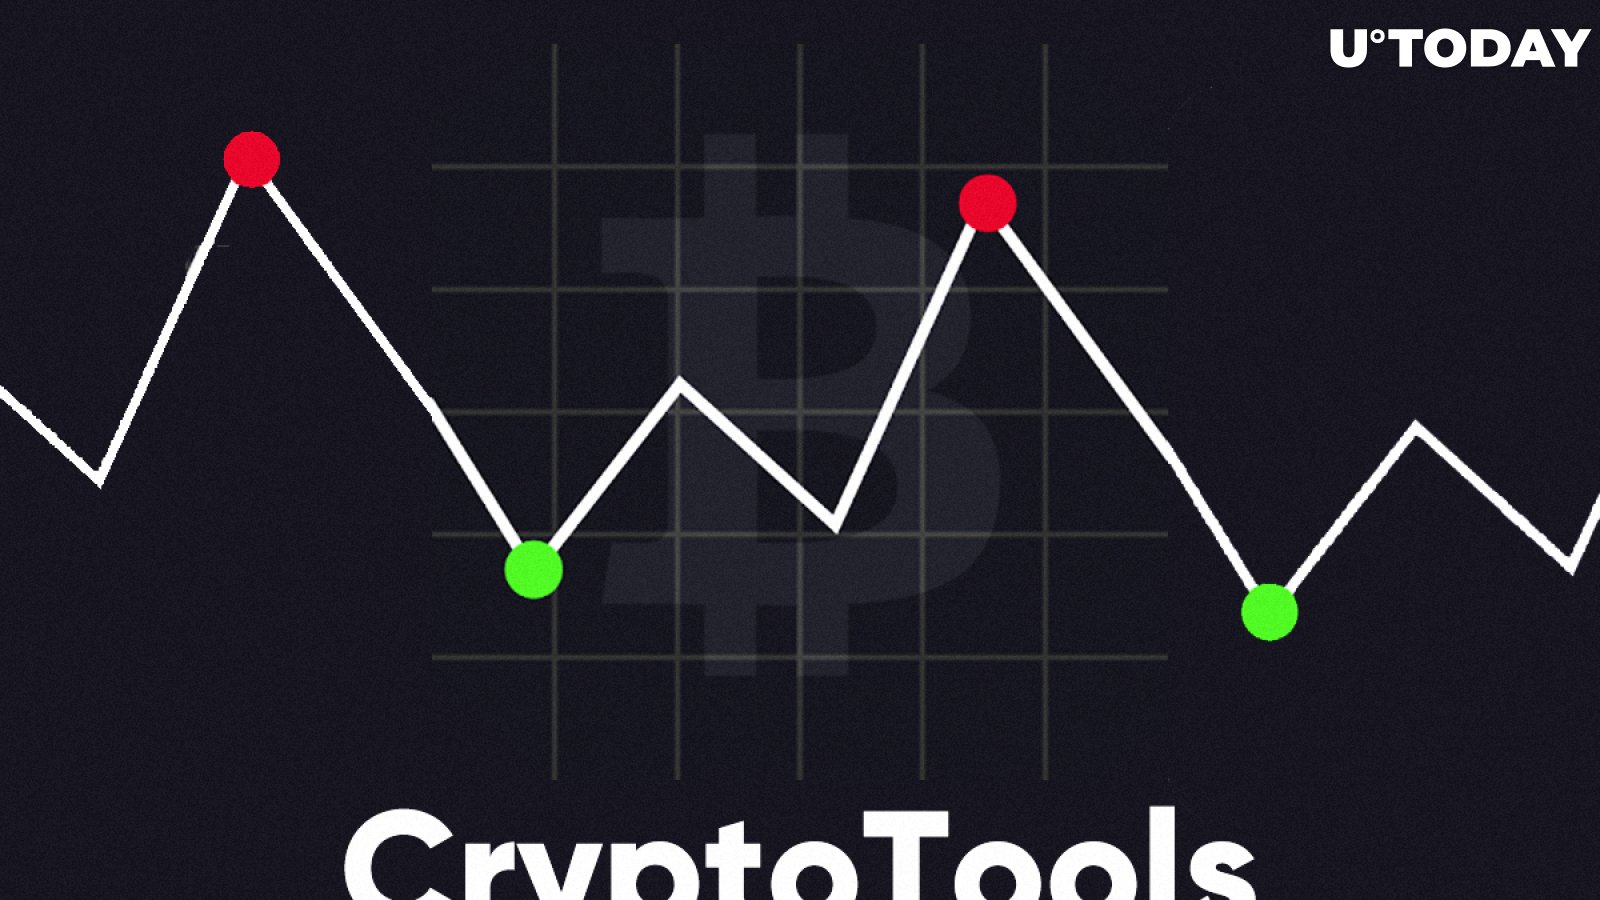 Trading App CryptoTools Adds U.Today To Its News Sources